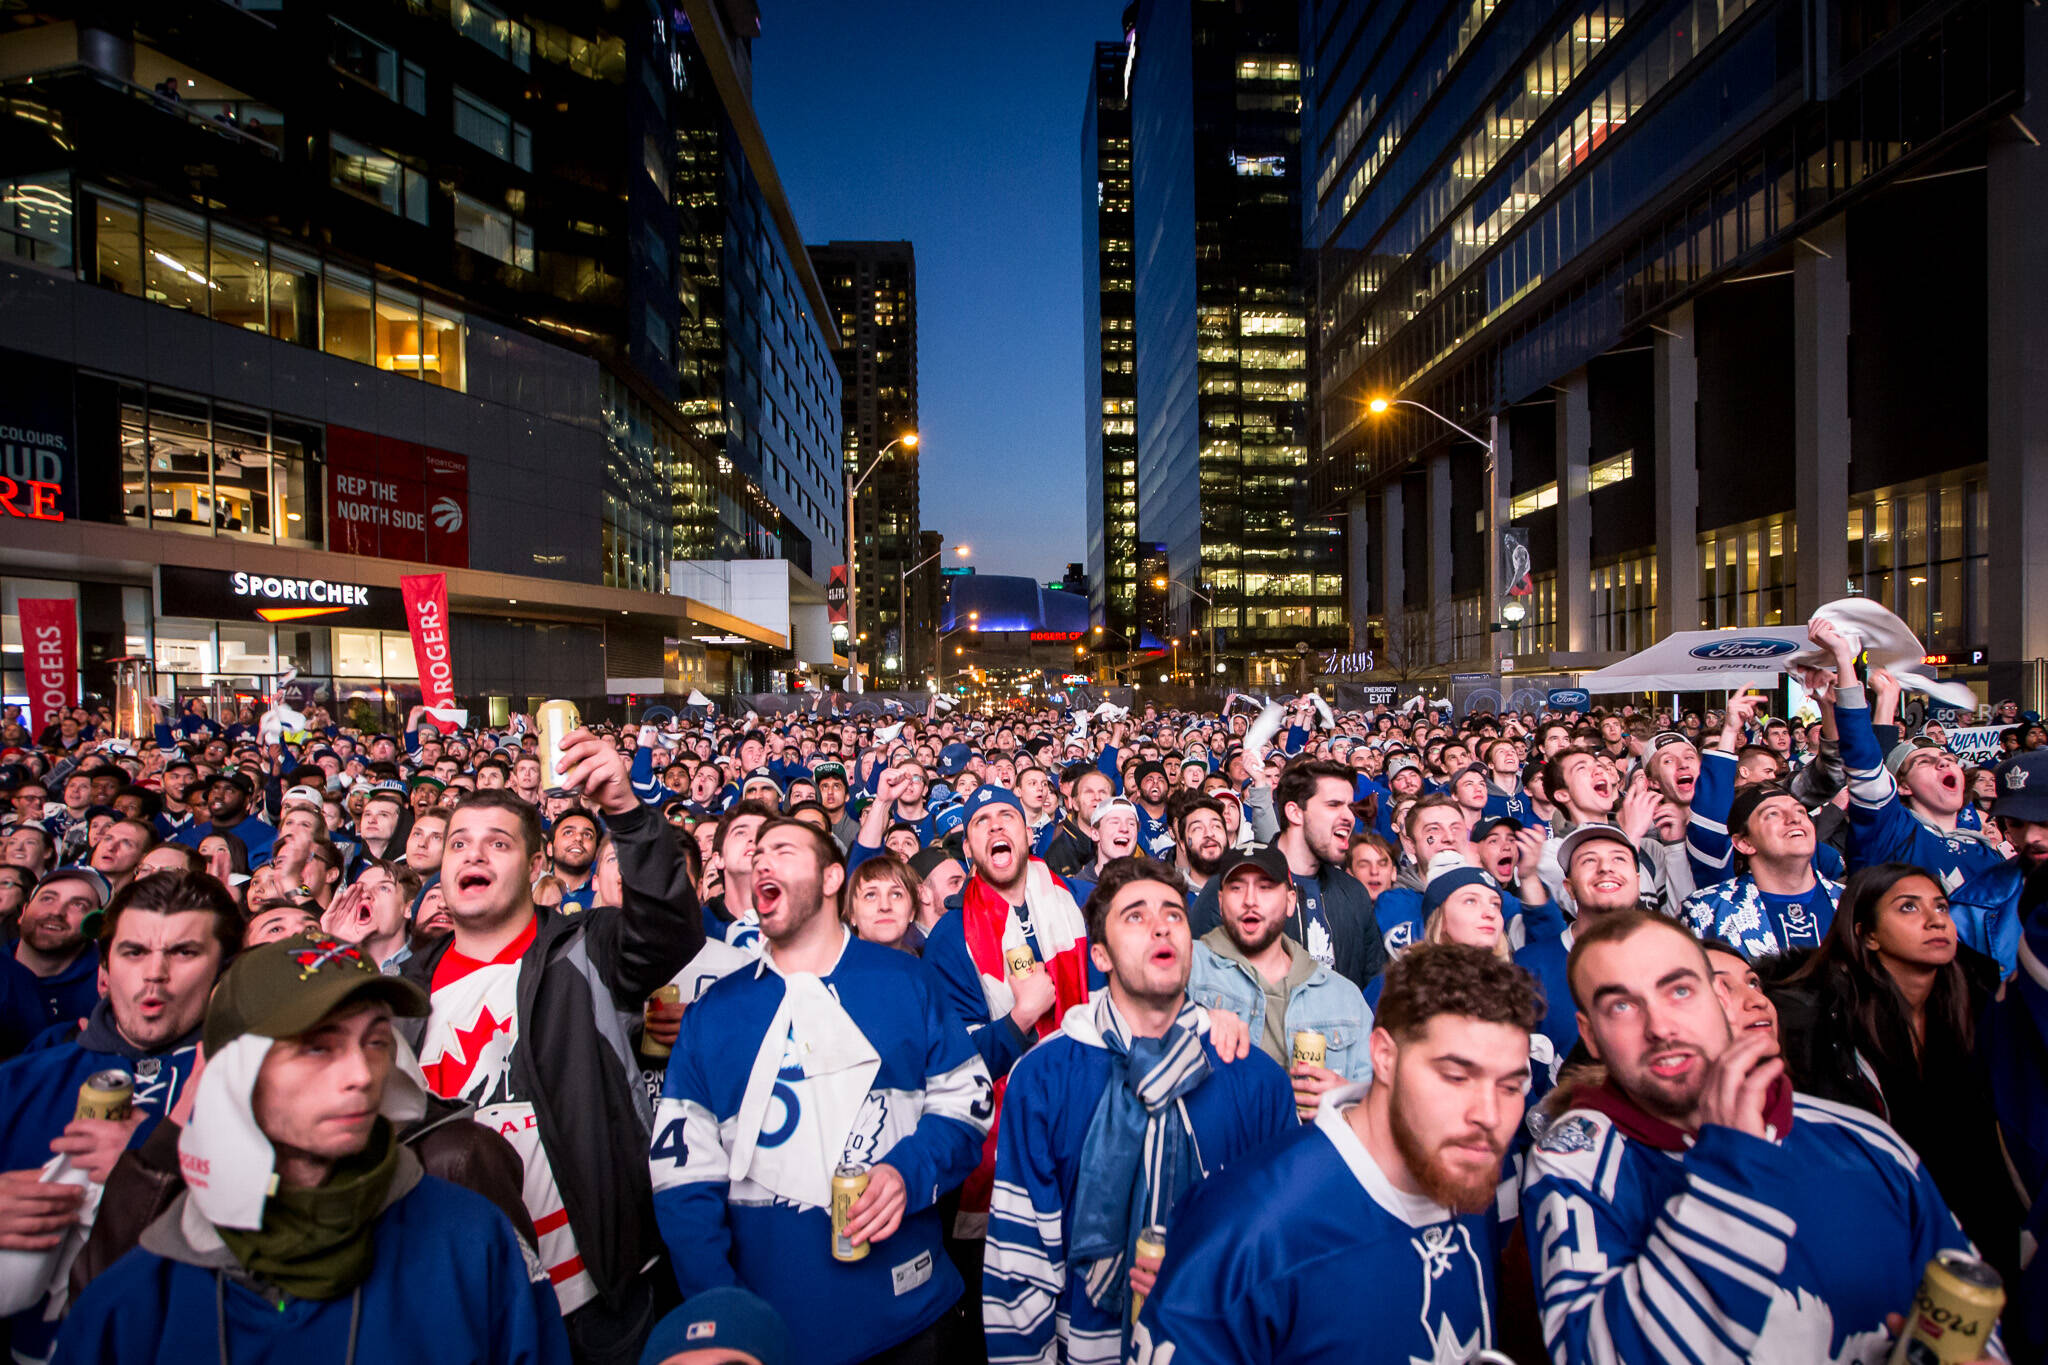 Maple Leaf Square just got a huge new LED screen (PHOTOS)